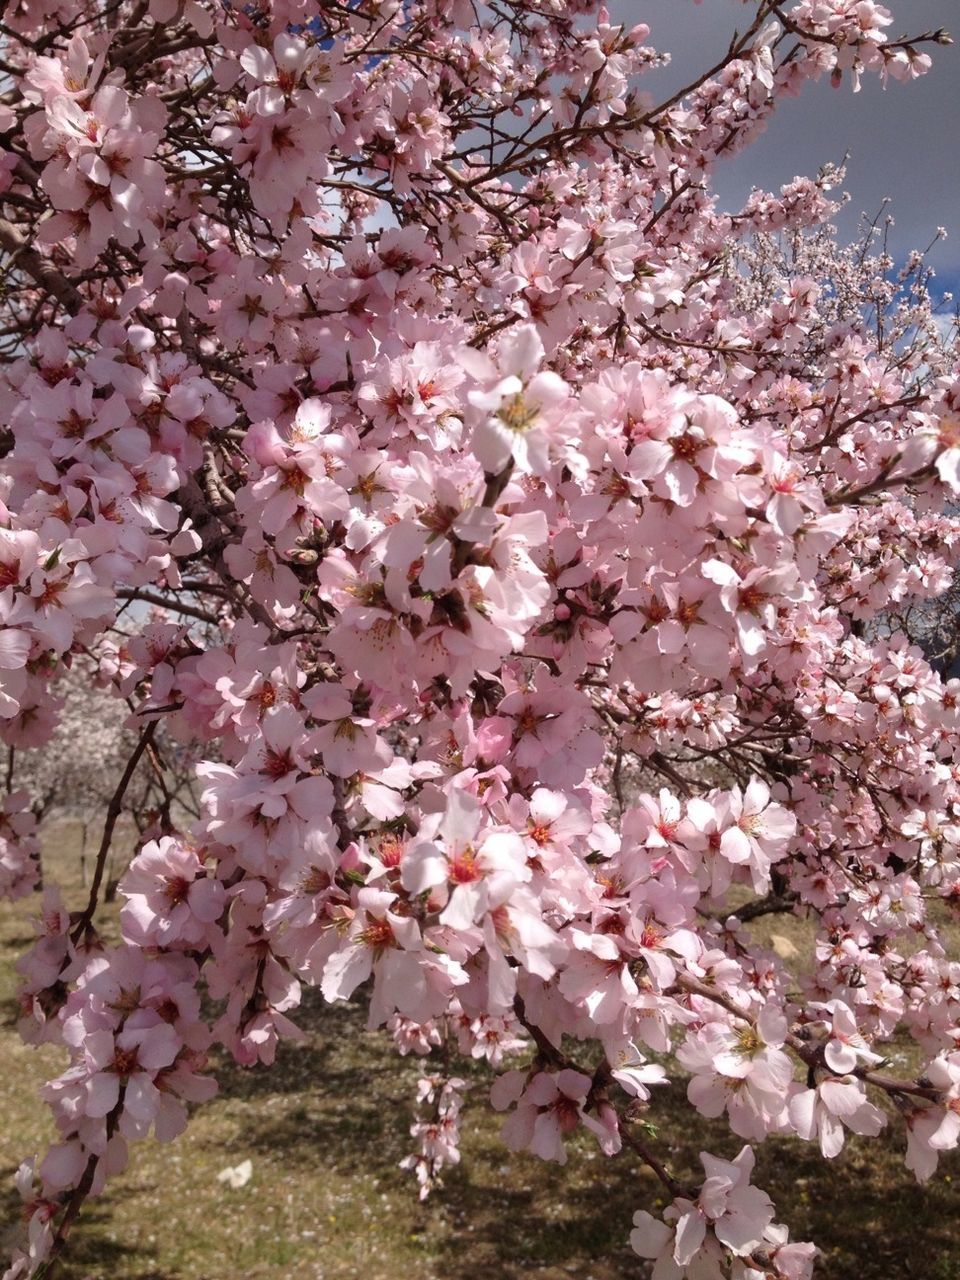 flower, freshness, branch, cherry blossom, tree, pink color, growth, fragility, cherry tree, blossom, beauty in nature, nature, springtime, in bloom, petal, fruit tree, pink, blooming, low angle view, abundance